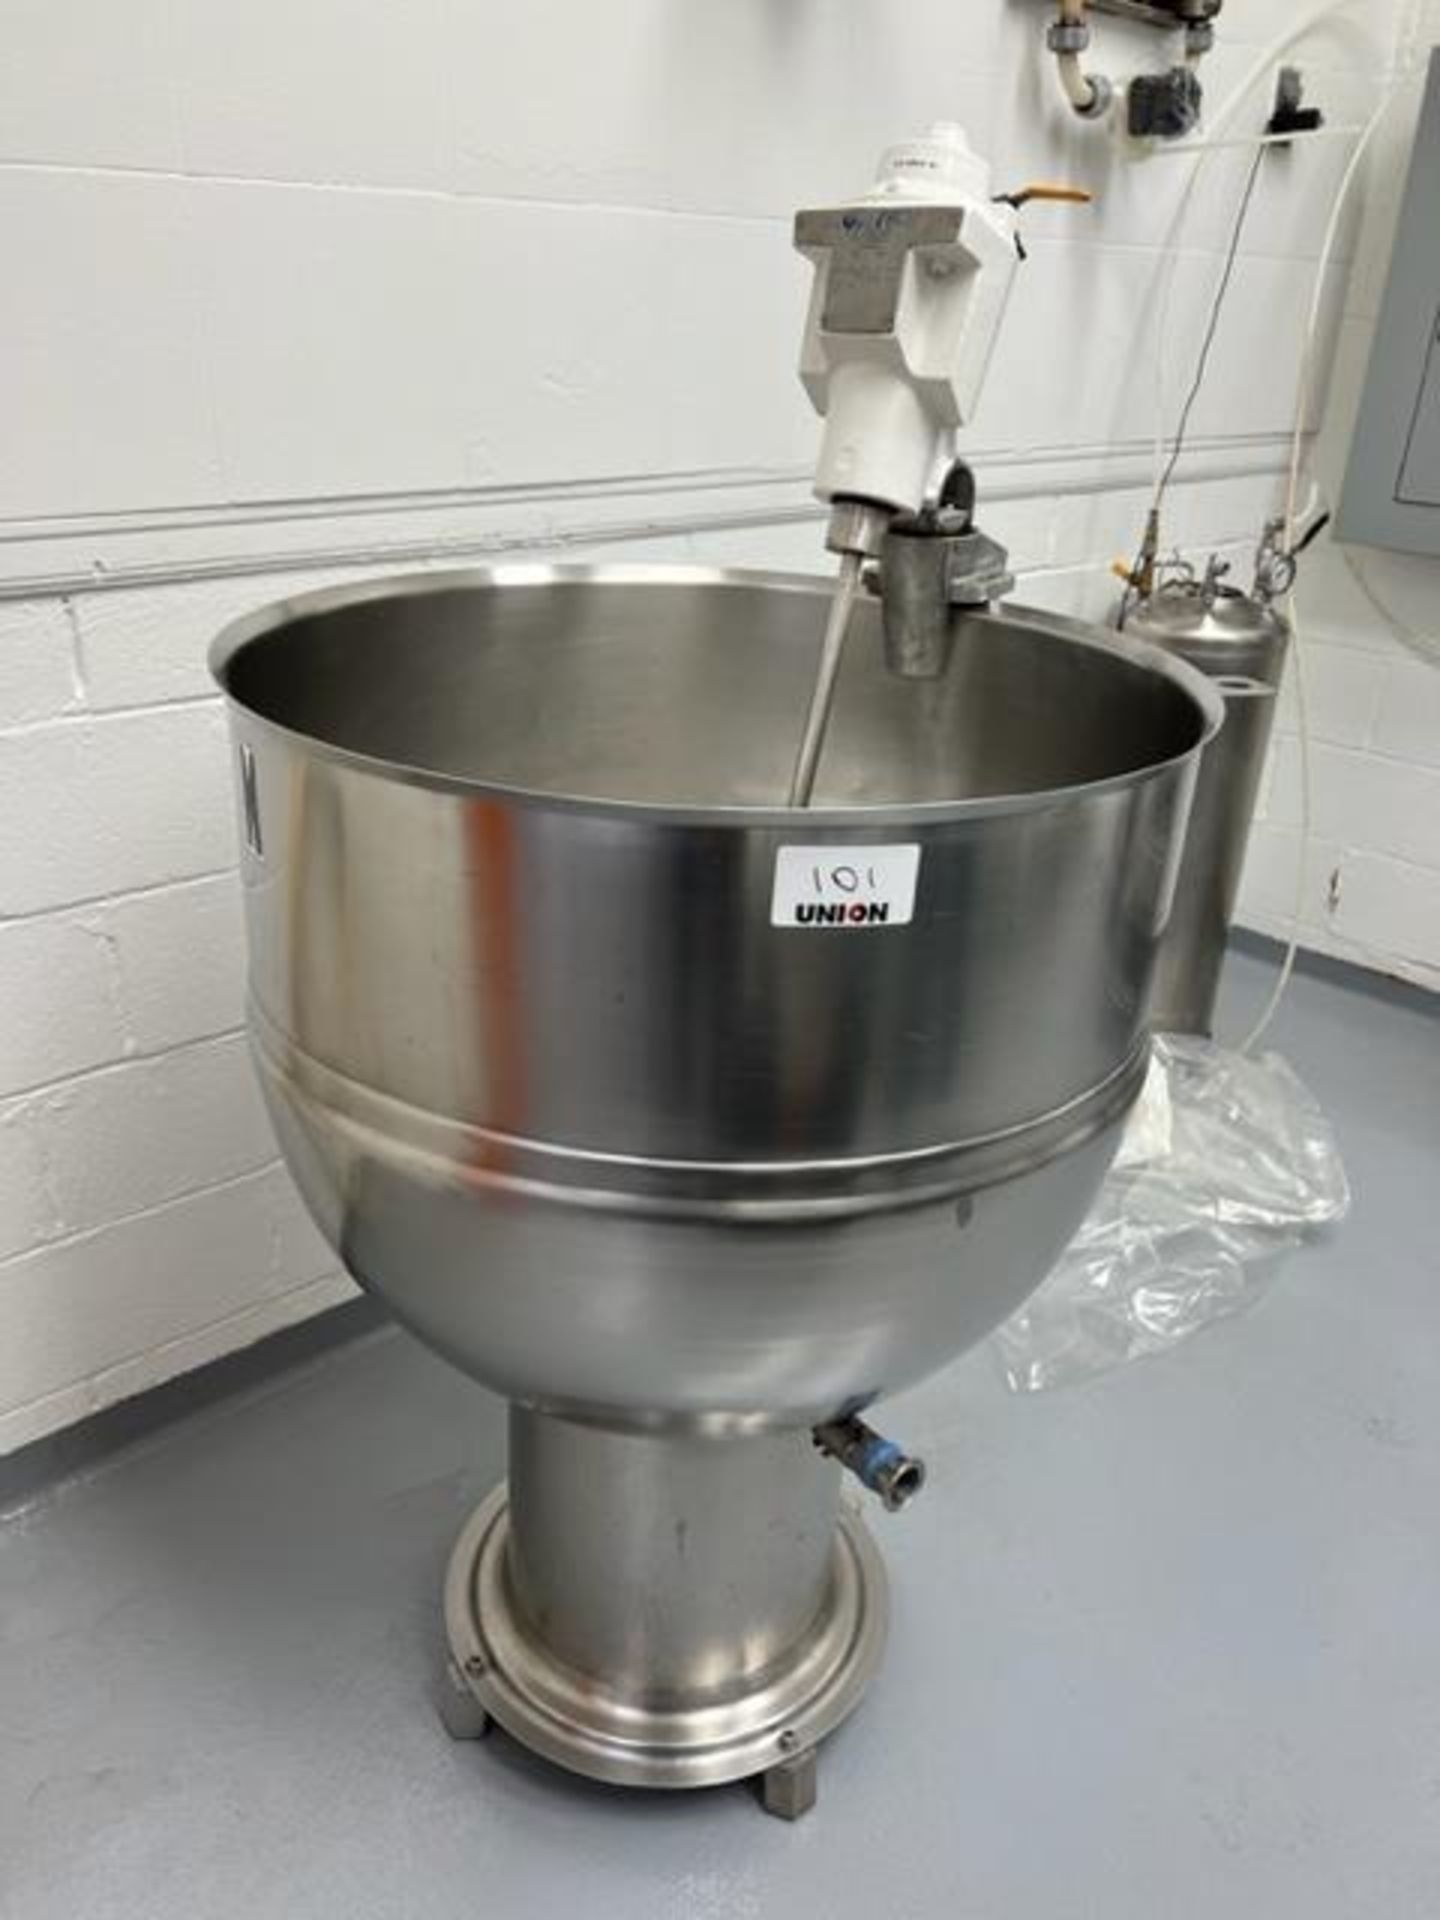 Asset 101 - Garland 60 gallon SS Jacketed Cooking kettle with Lightnin Mixer, 25 psi,